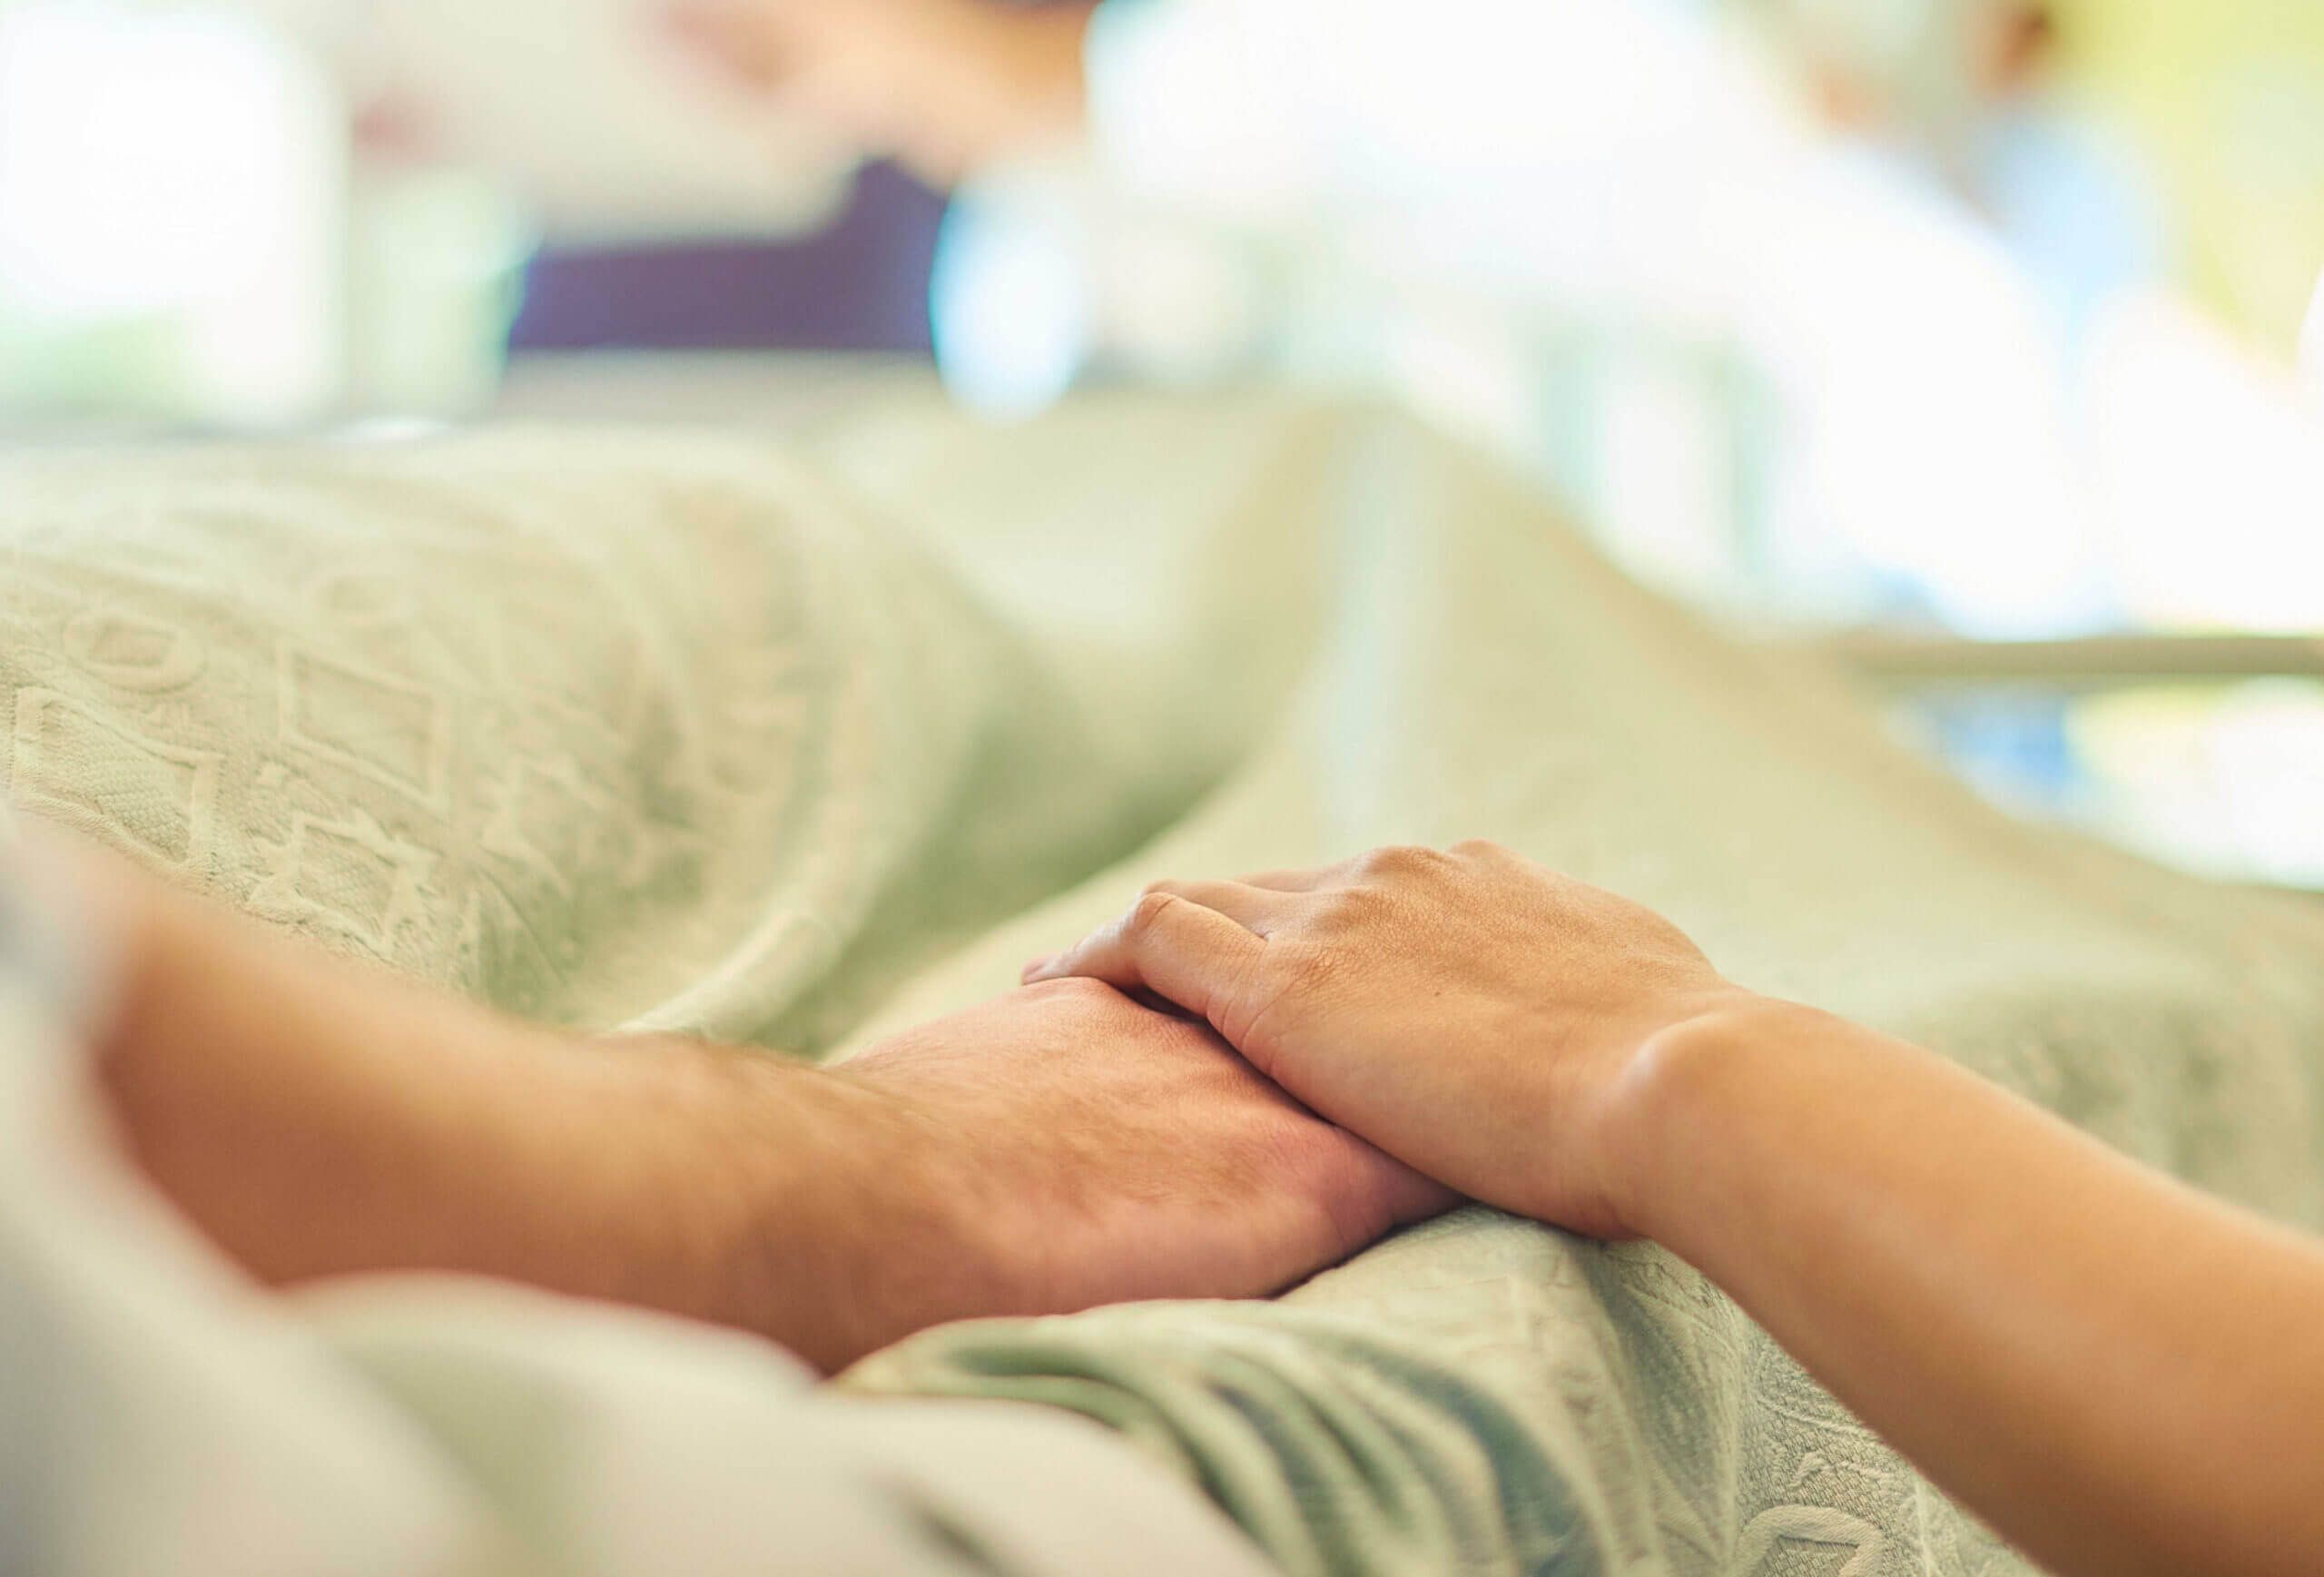 Hospital and end of life grief care in Omaha